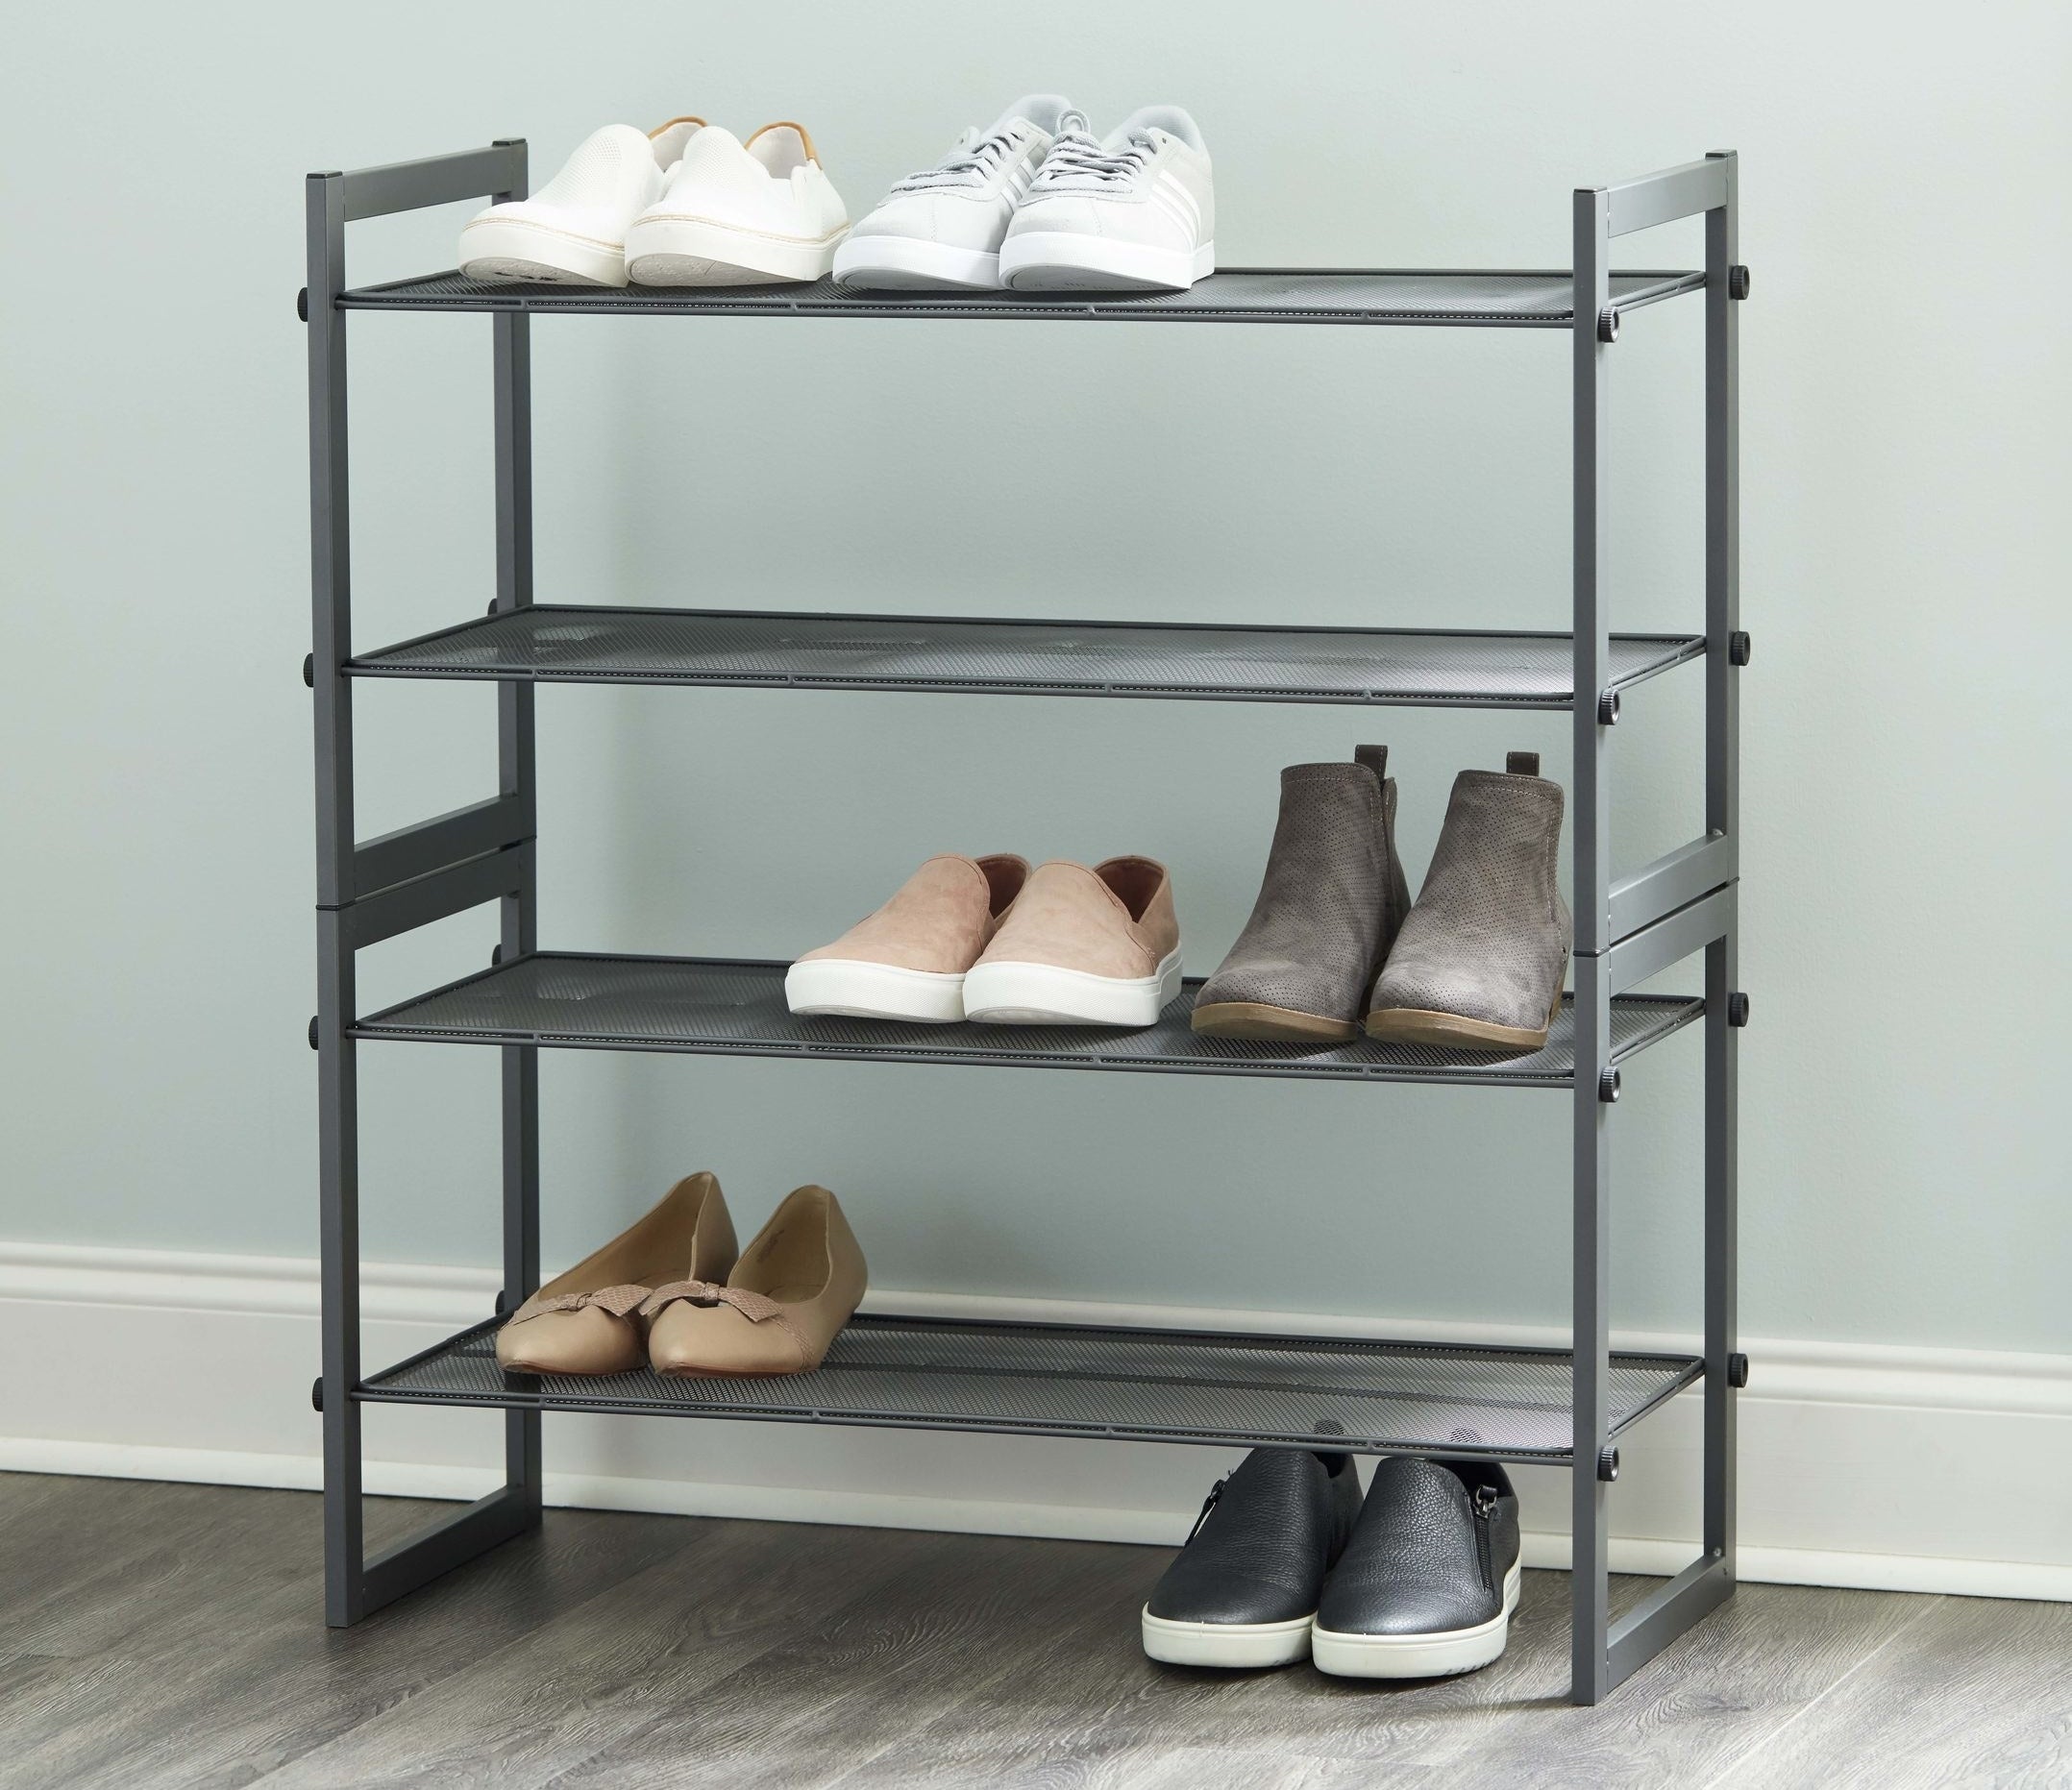 A two-tier stackable mesh shoe rack